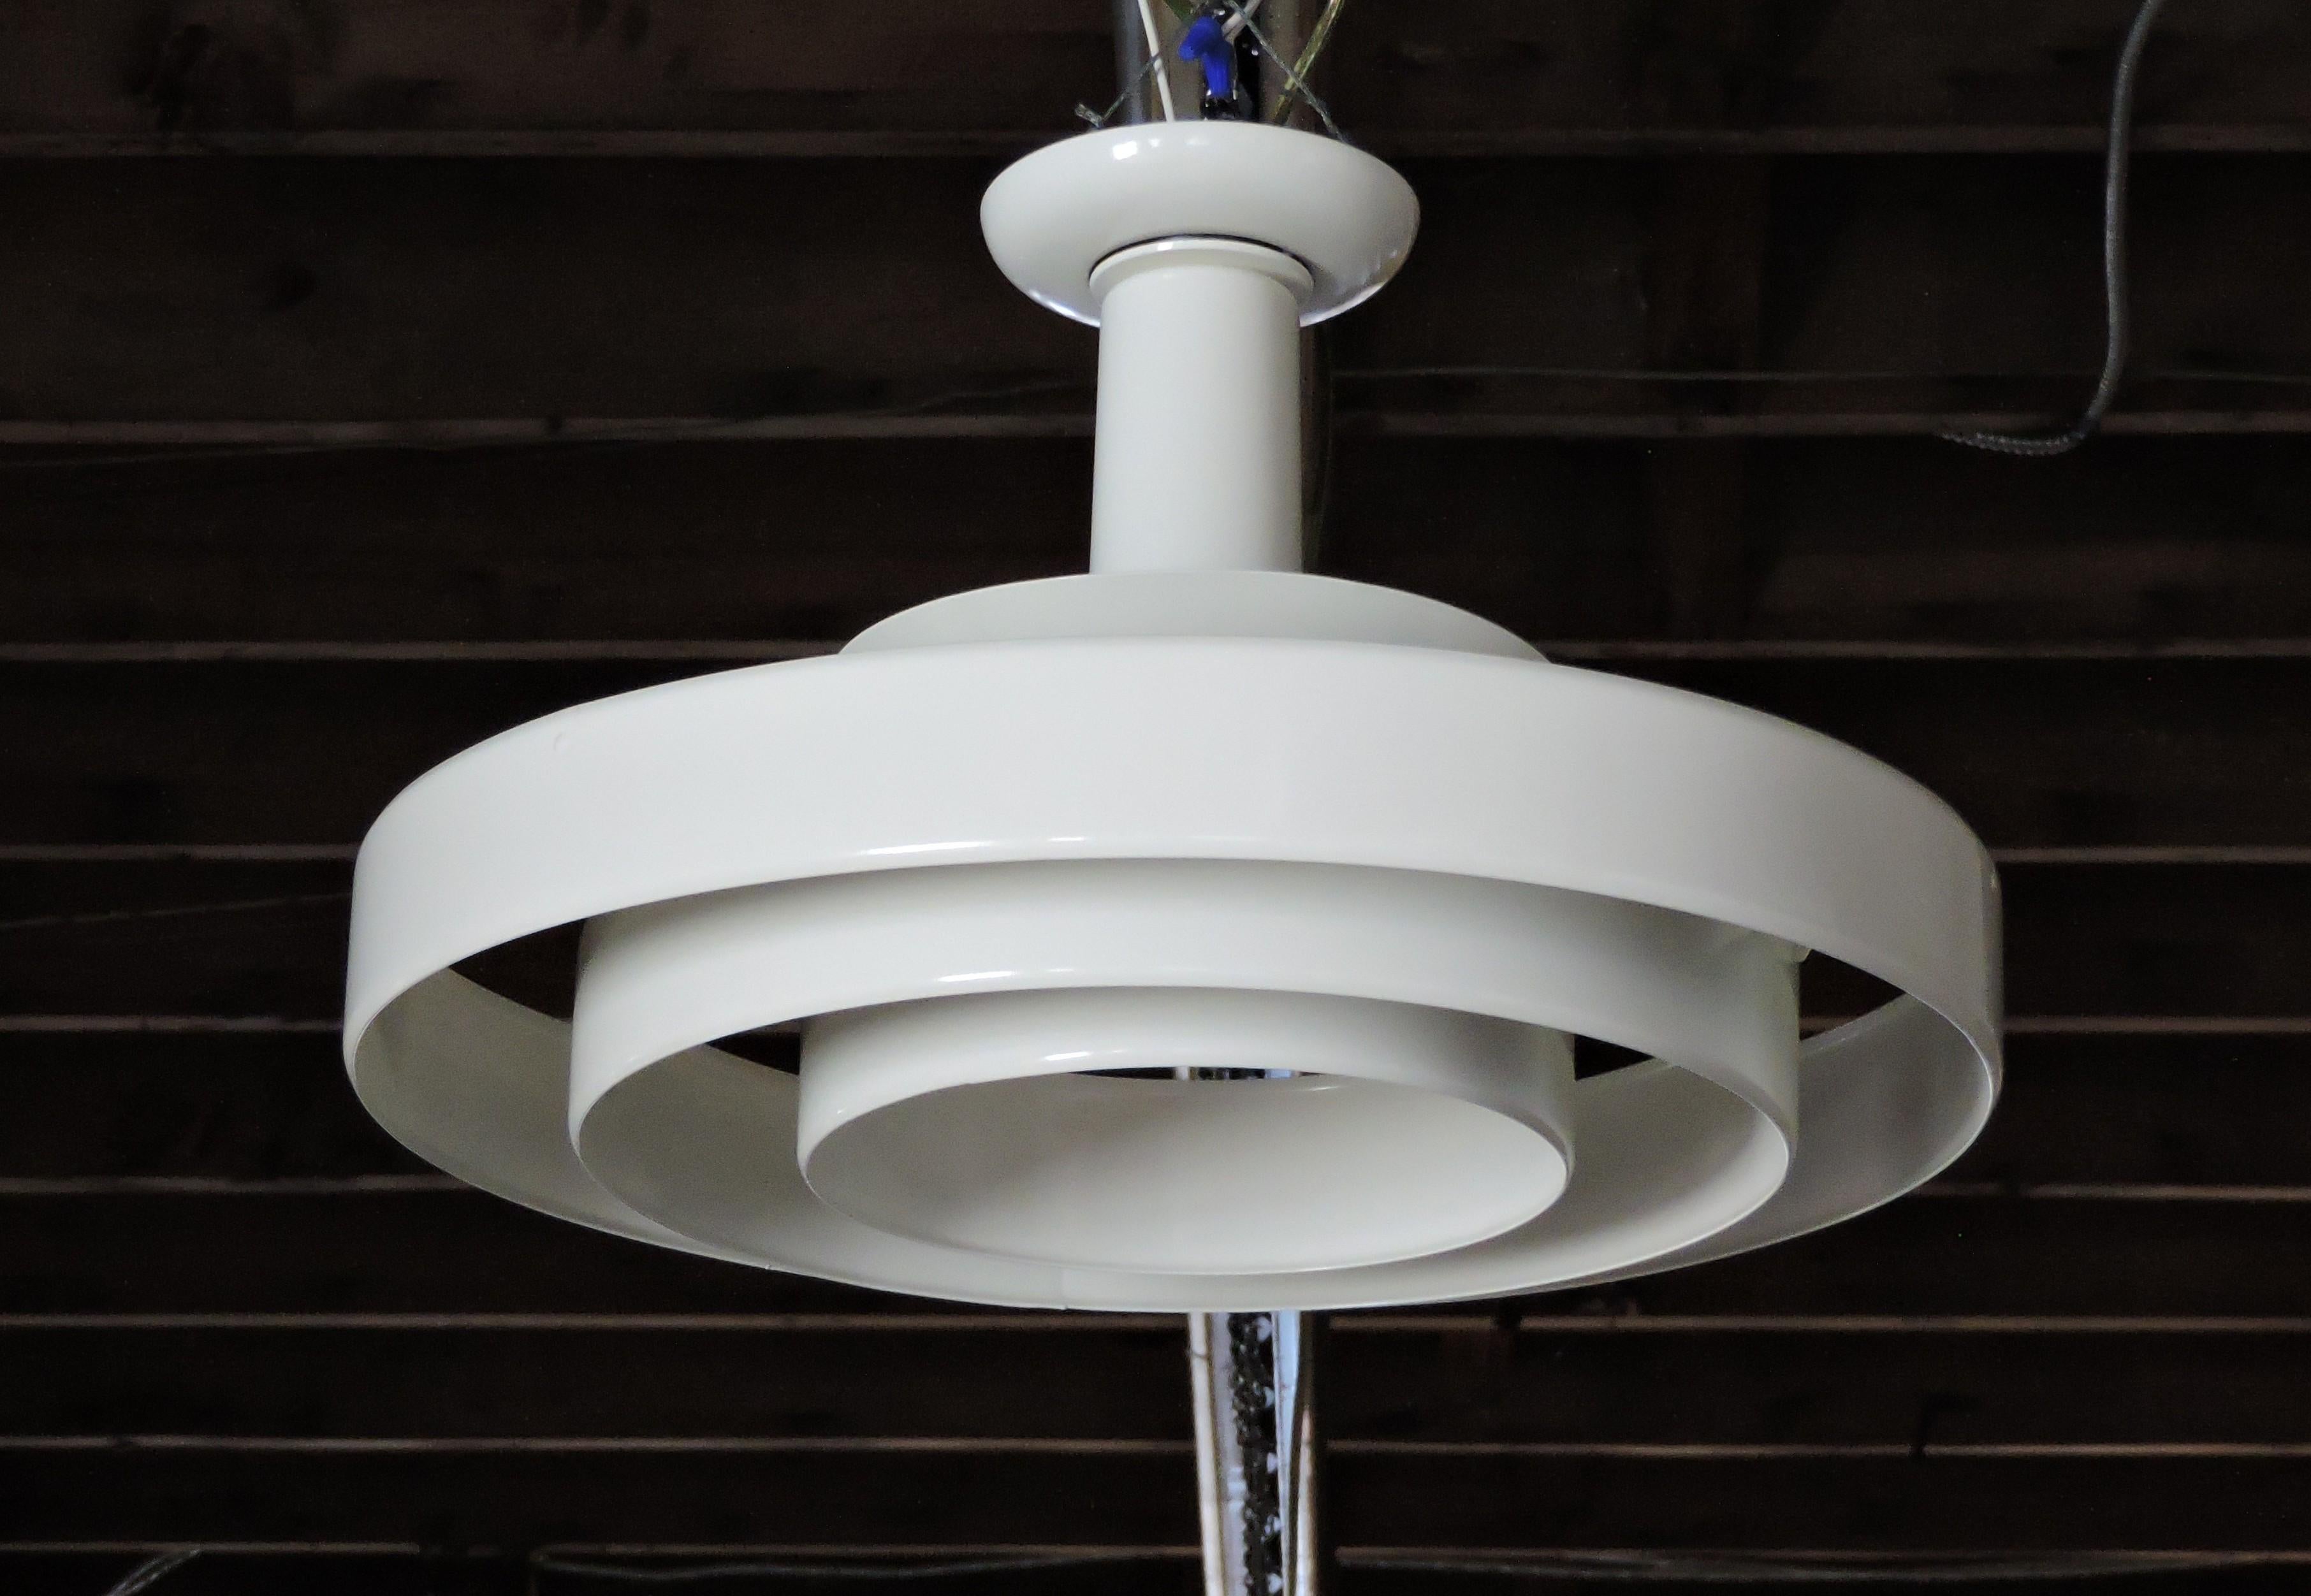 Classic ring light made by Prescolite in the 1950s/60s. This flush mount fixture consists of three concentric rings which nicely diffuse the light. It has been freshly powder coated and has new wiring.